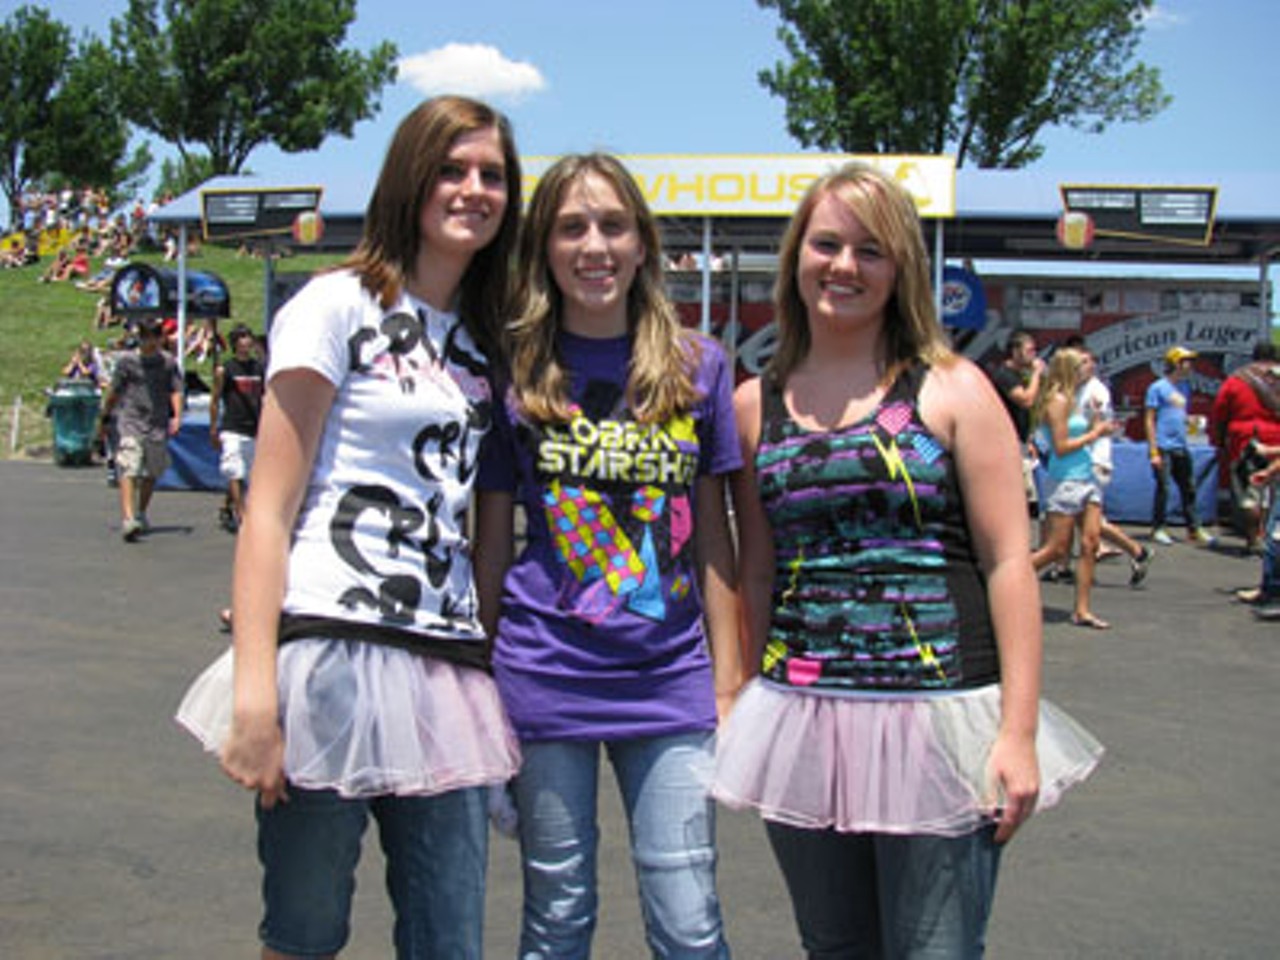 These fans were excited for Paramore. T-shirts from that band, The Academy Is...and Cobra Starship were the big favorites this year.